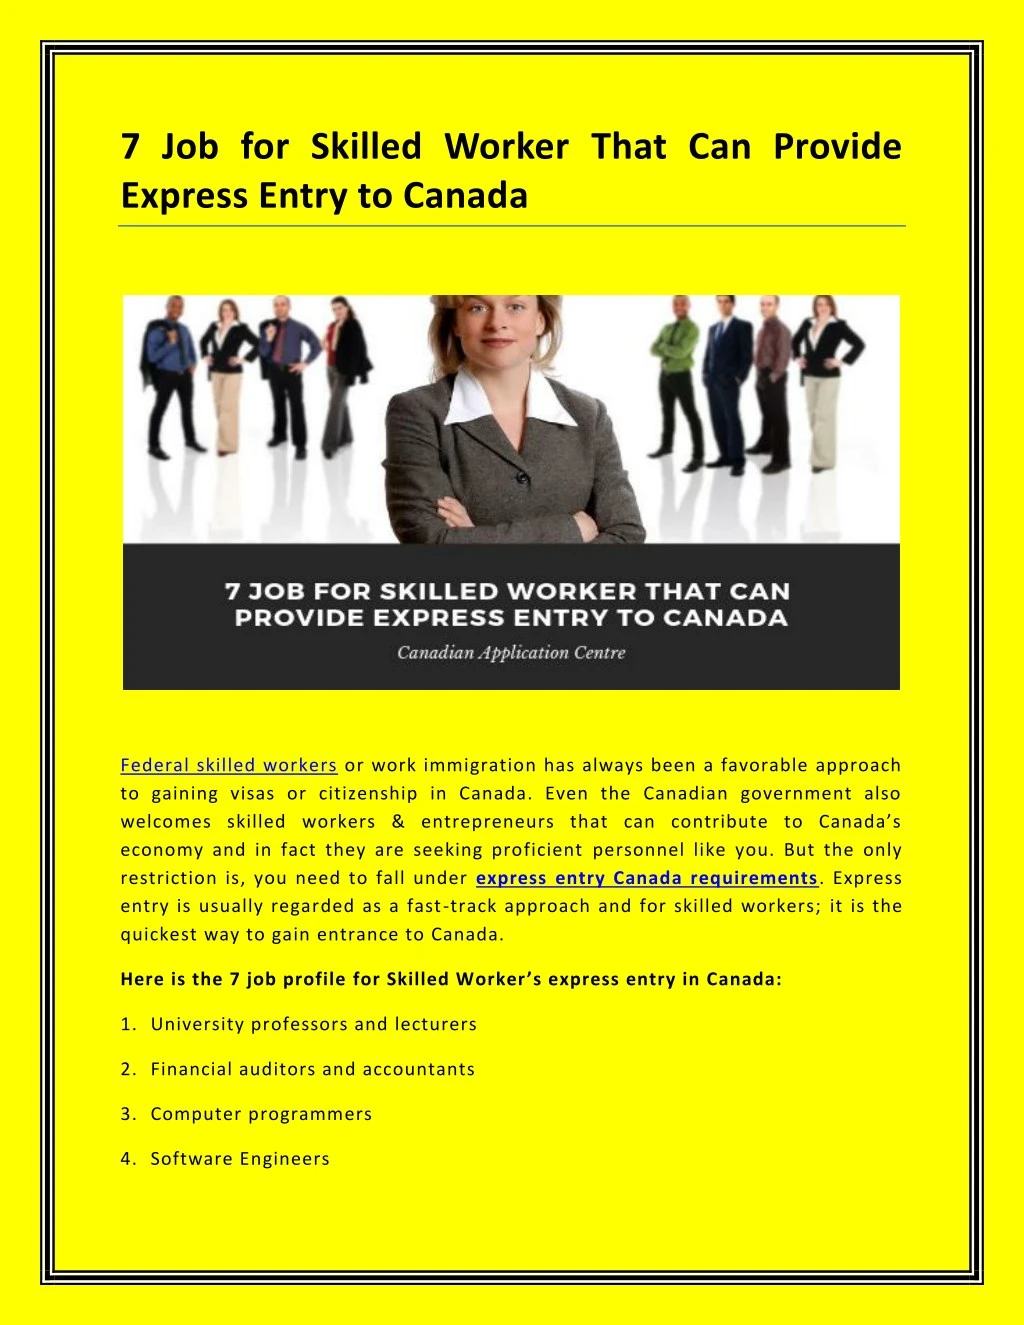 7 job for skilled worker that can provide express